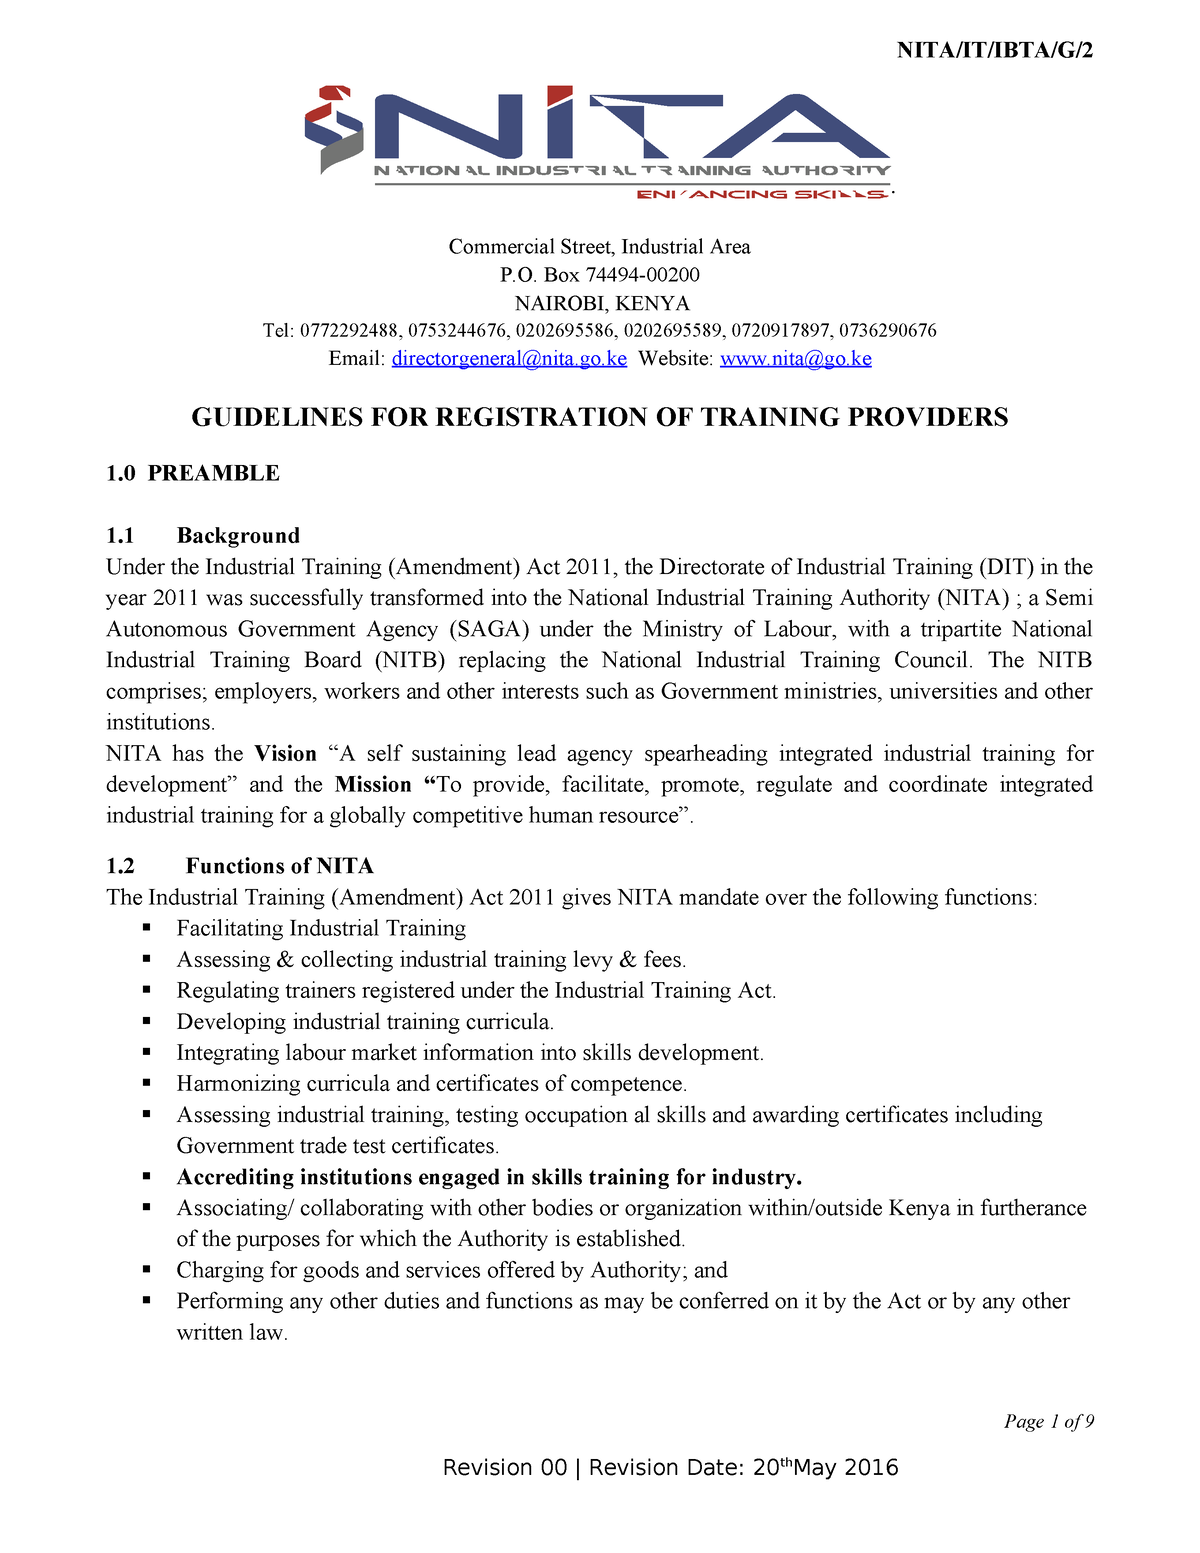 02 Guidelines For Registration Of Training Providers 1 - . Commercial ...